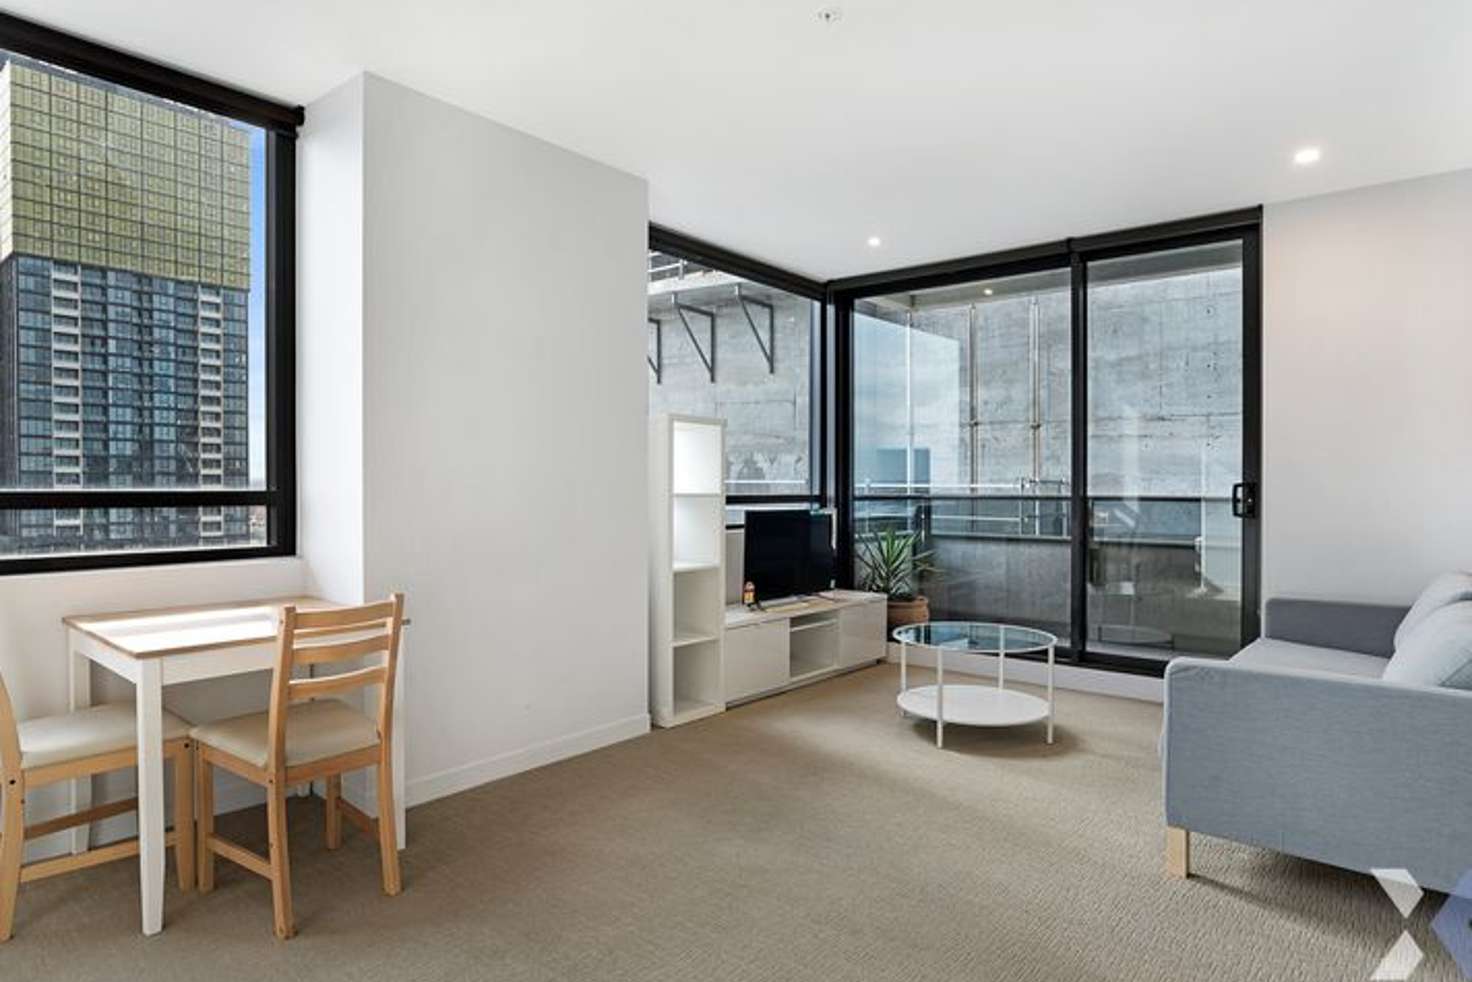 Main view of Homely apartment listing, 3001/80 A'beckett Street, Melbourne VIC 3000